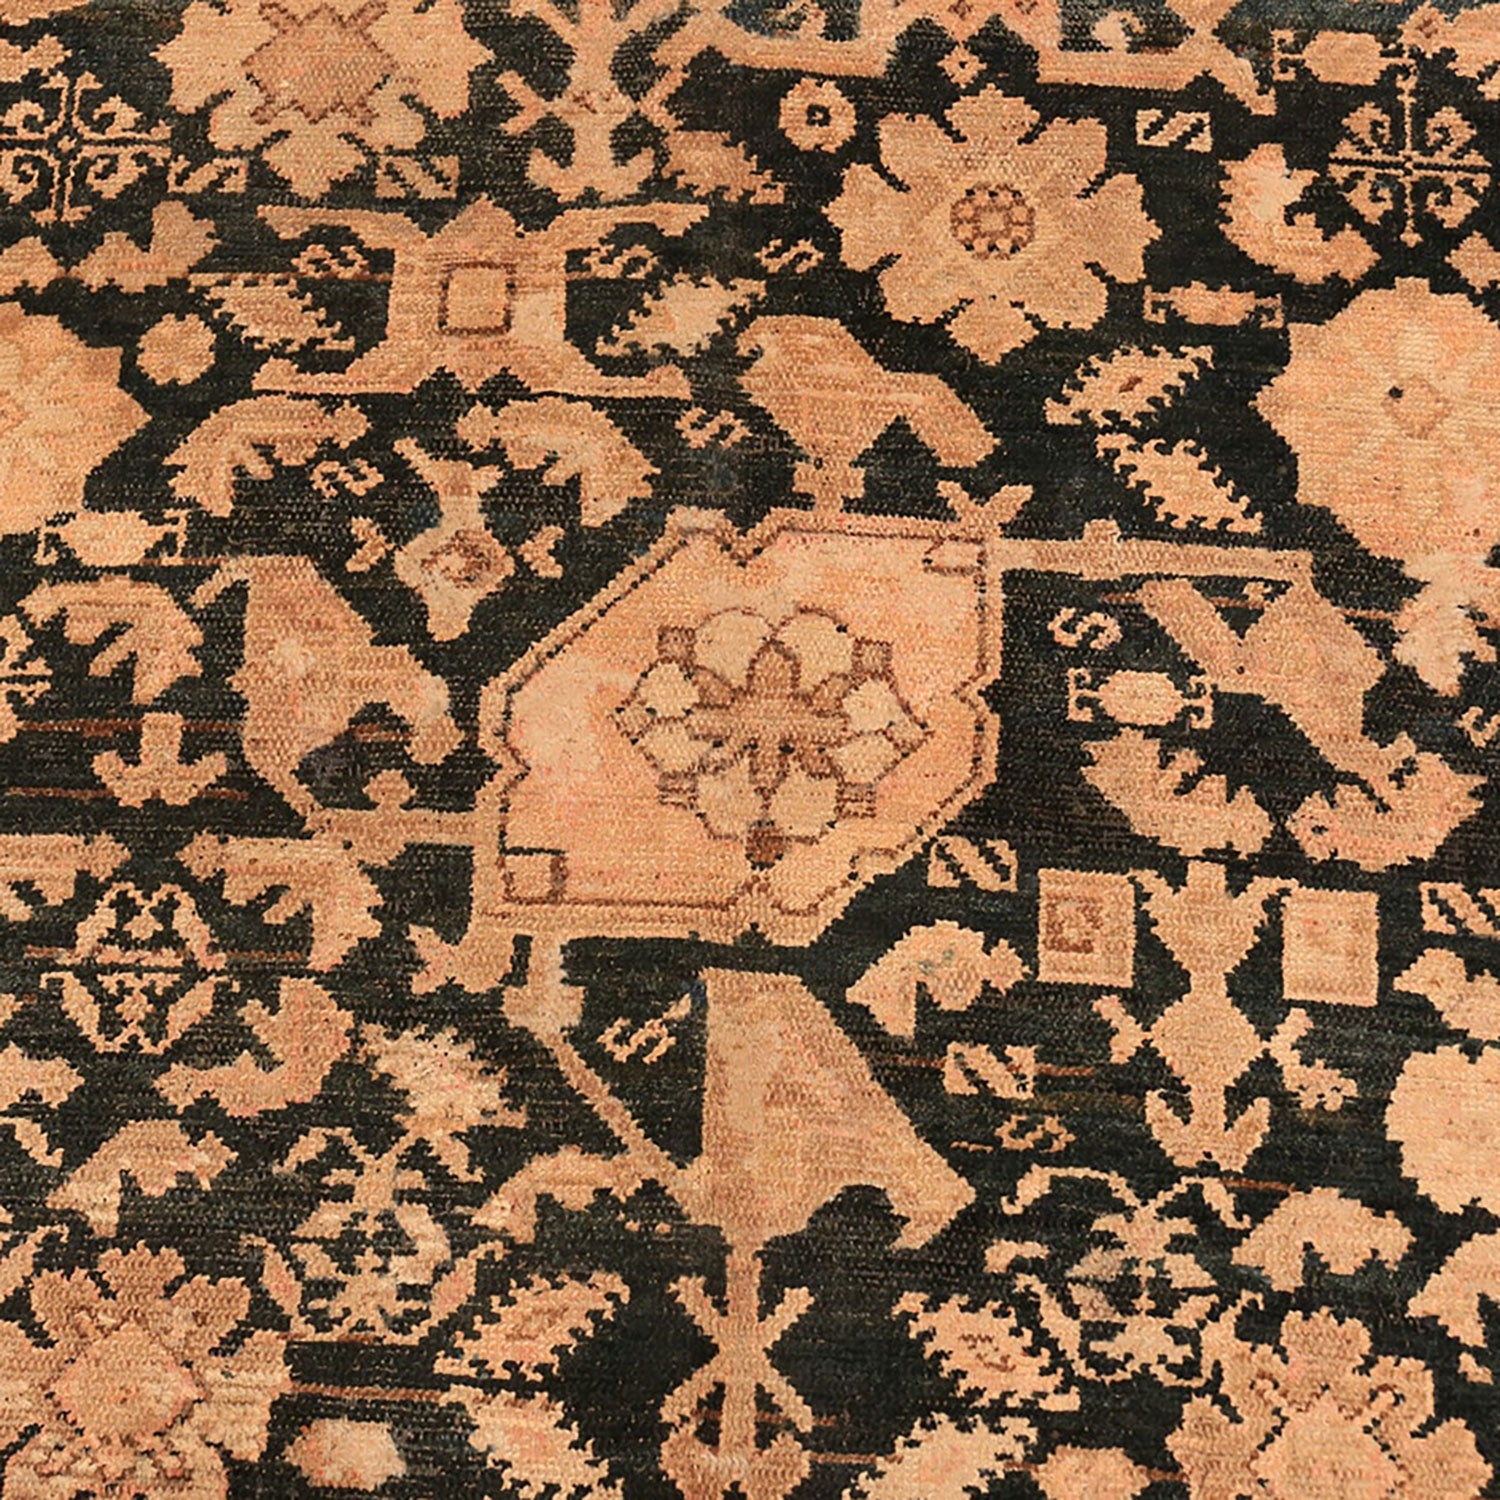 Intricately woven rug showcases traditional patterns with dark and light tones.